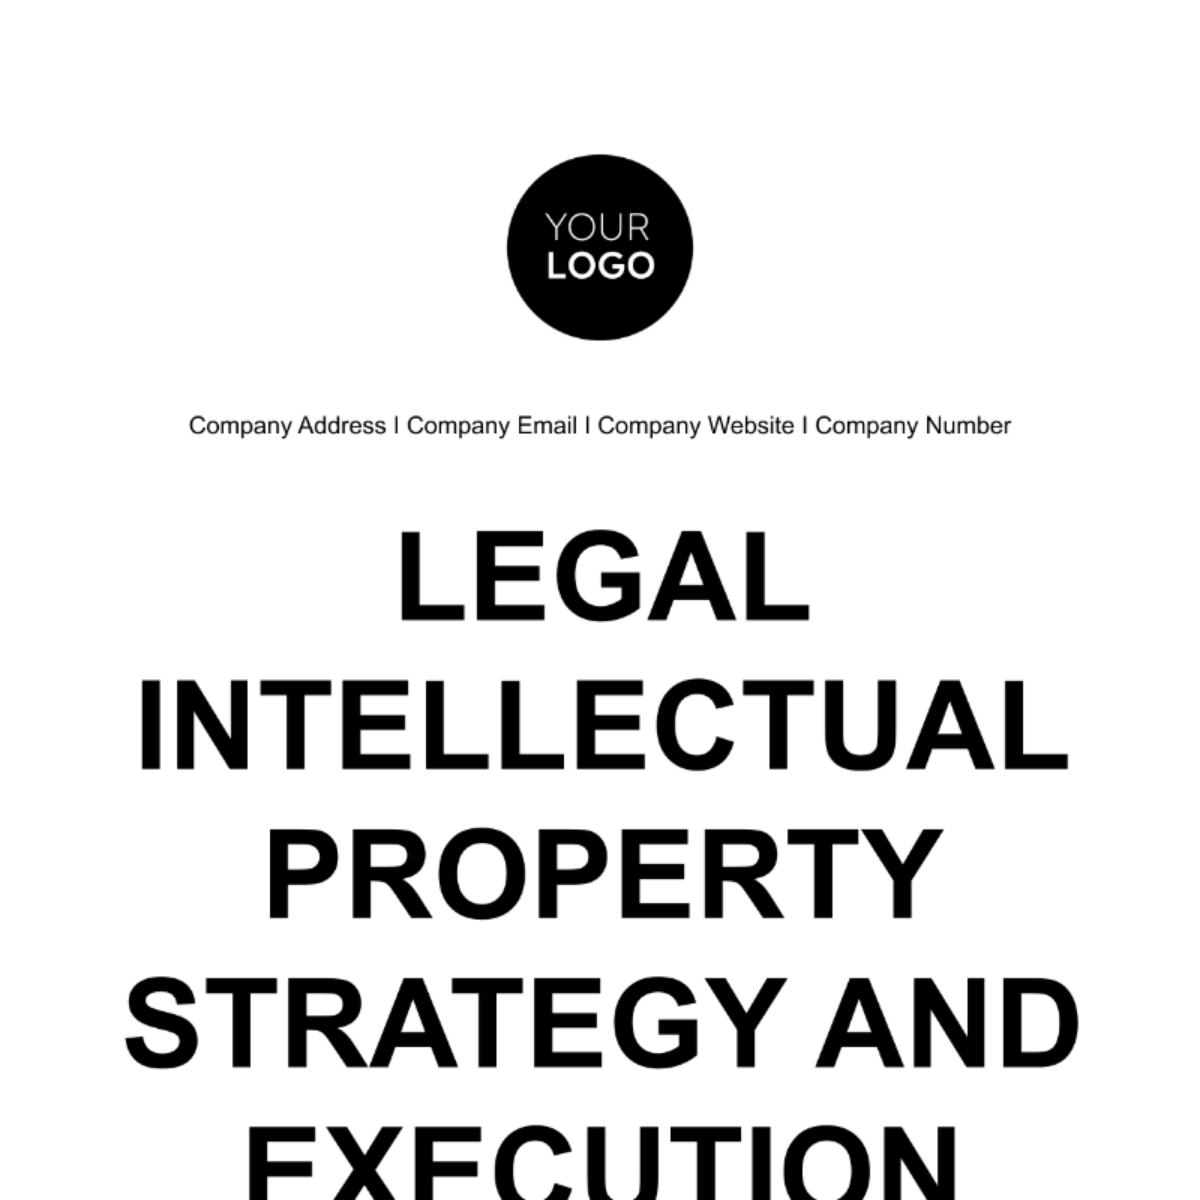 Legal Intellectual Property Strategy and Execution Plan Template